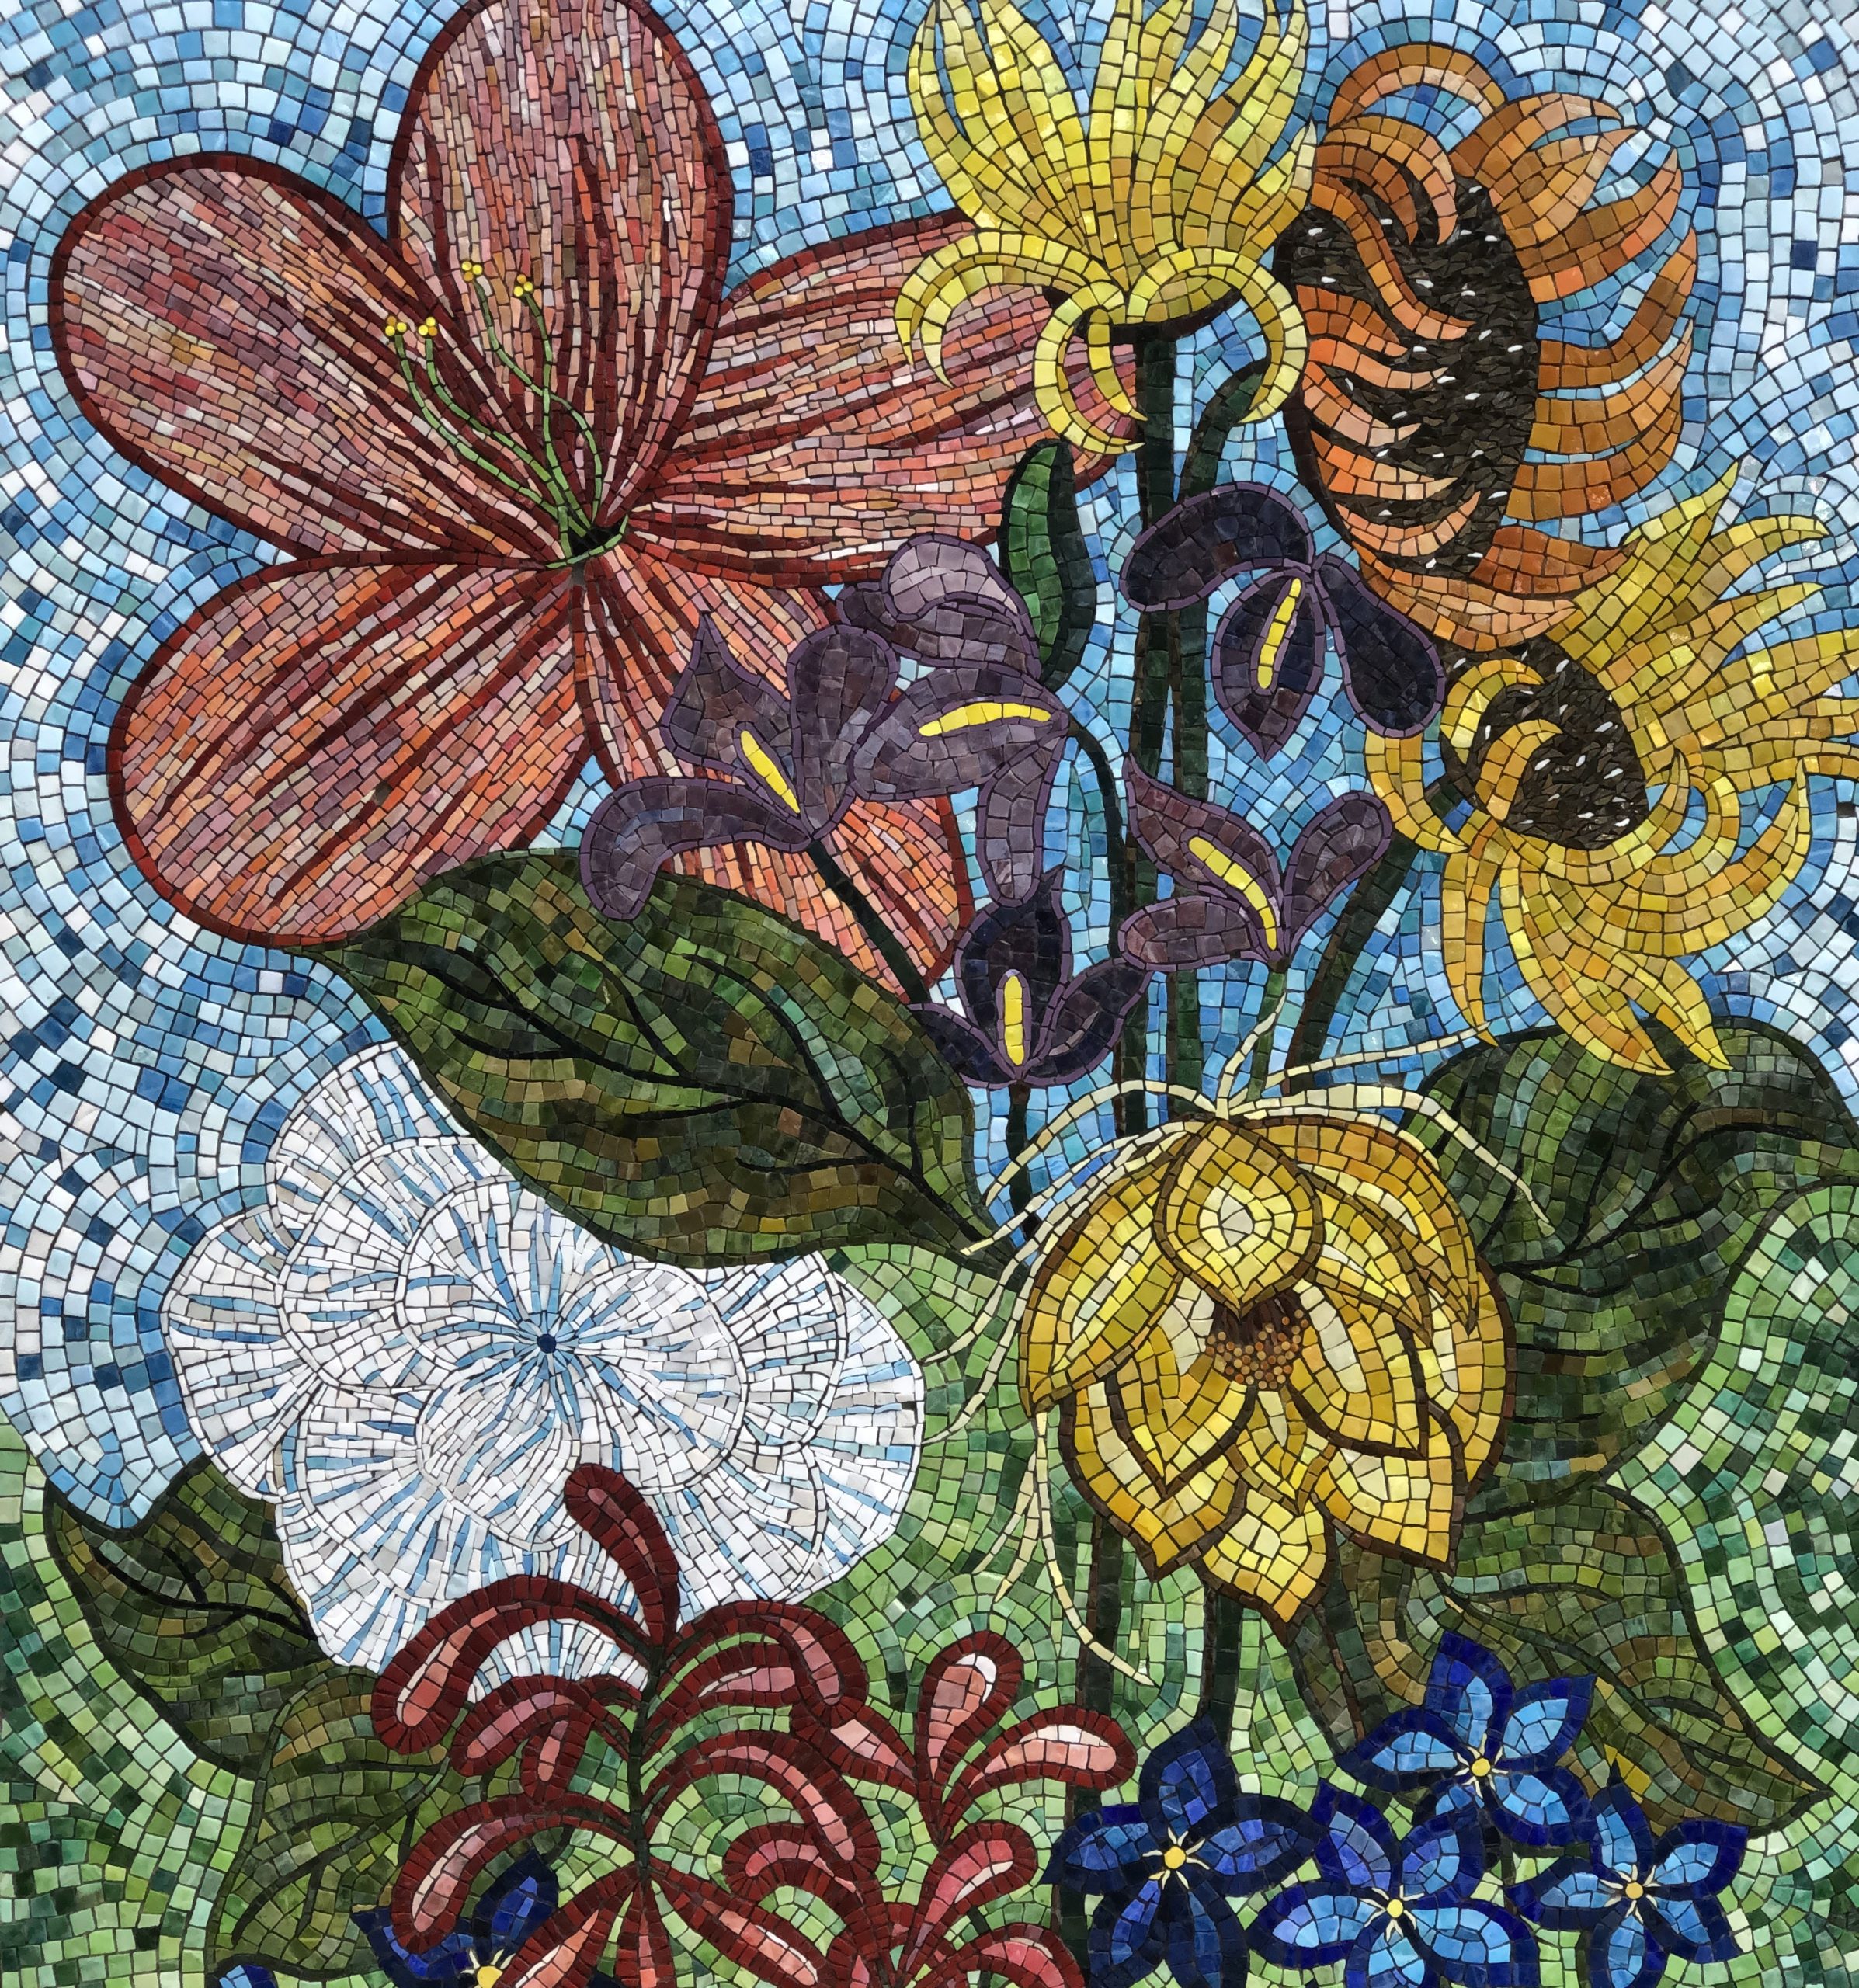 Wall of Flowers, Garden Commission